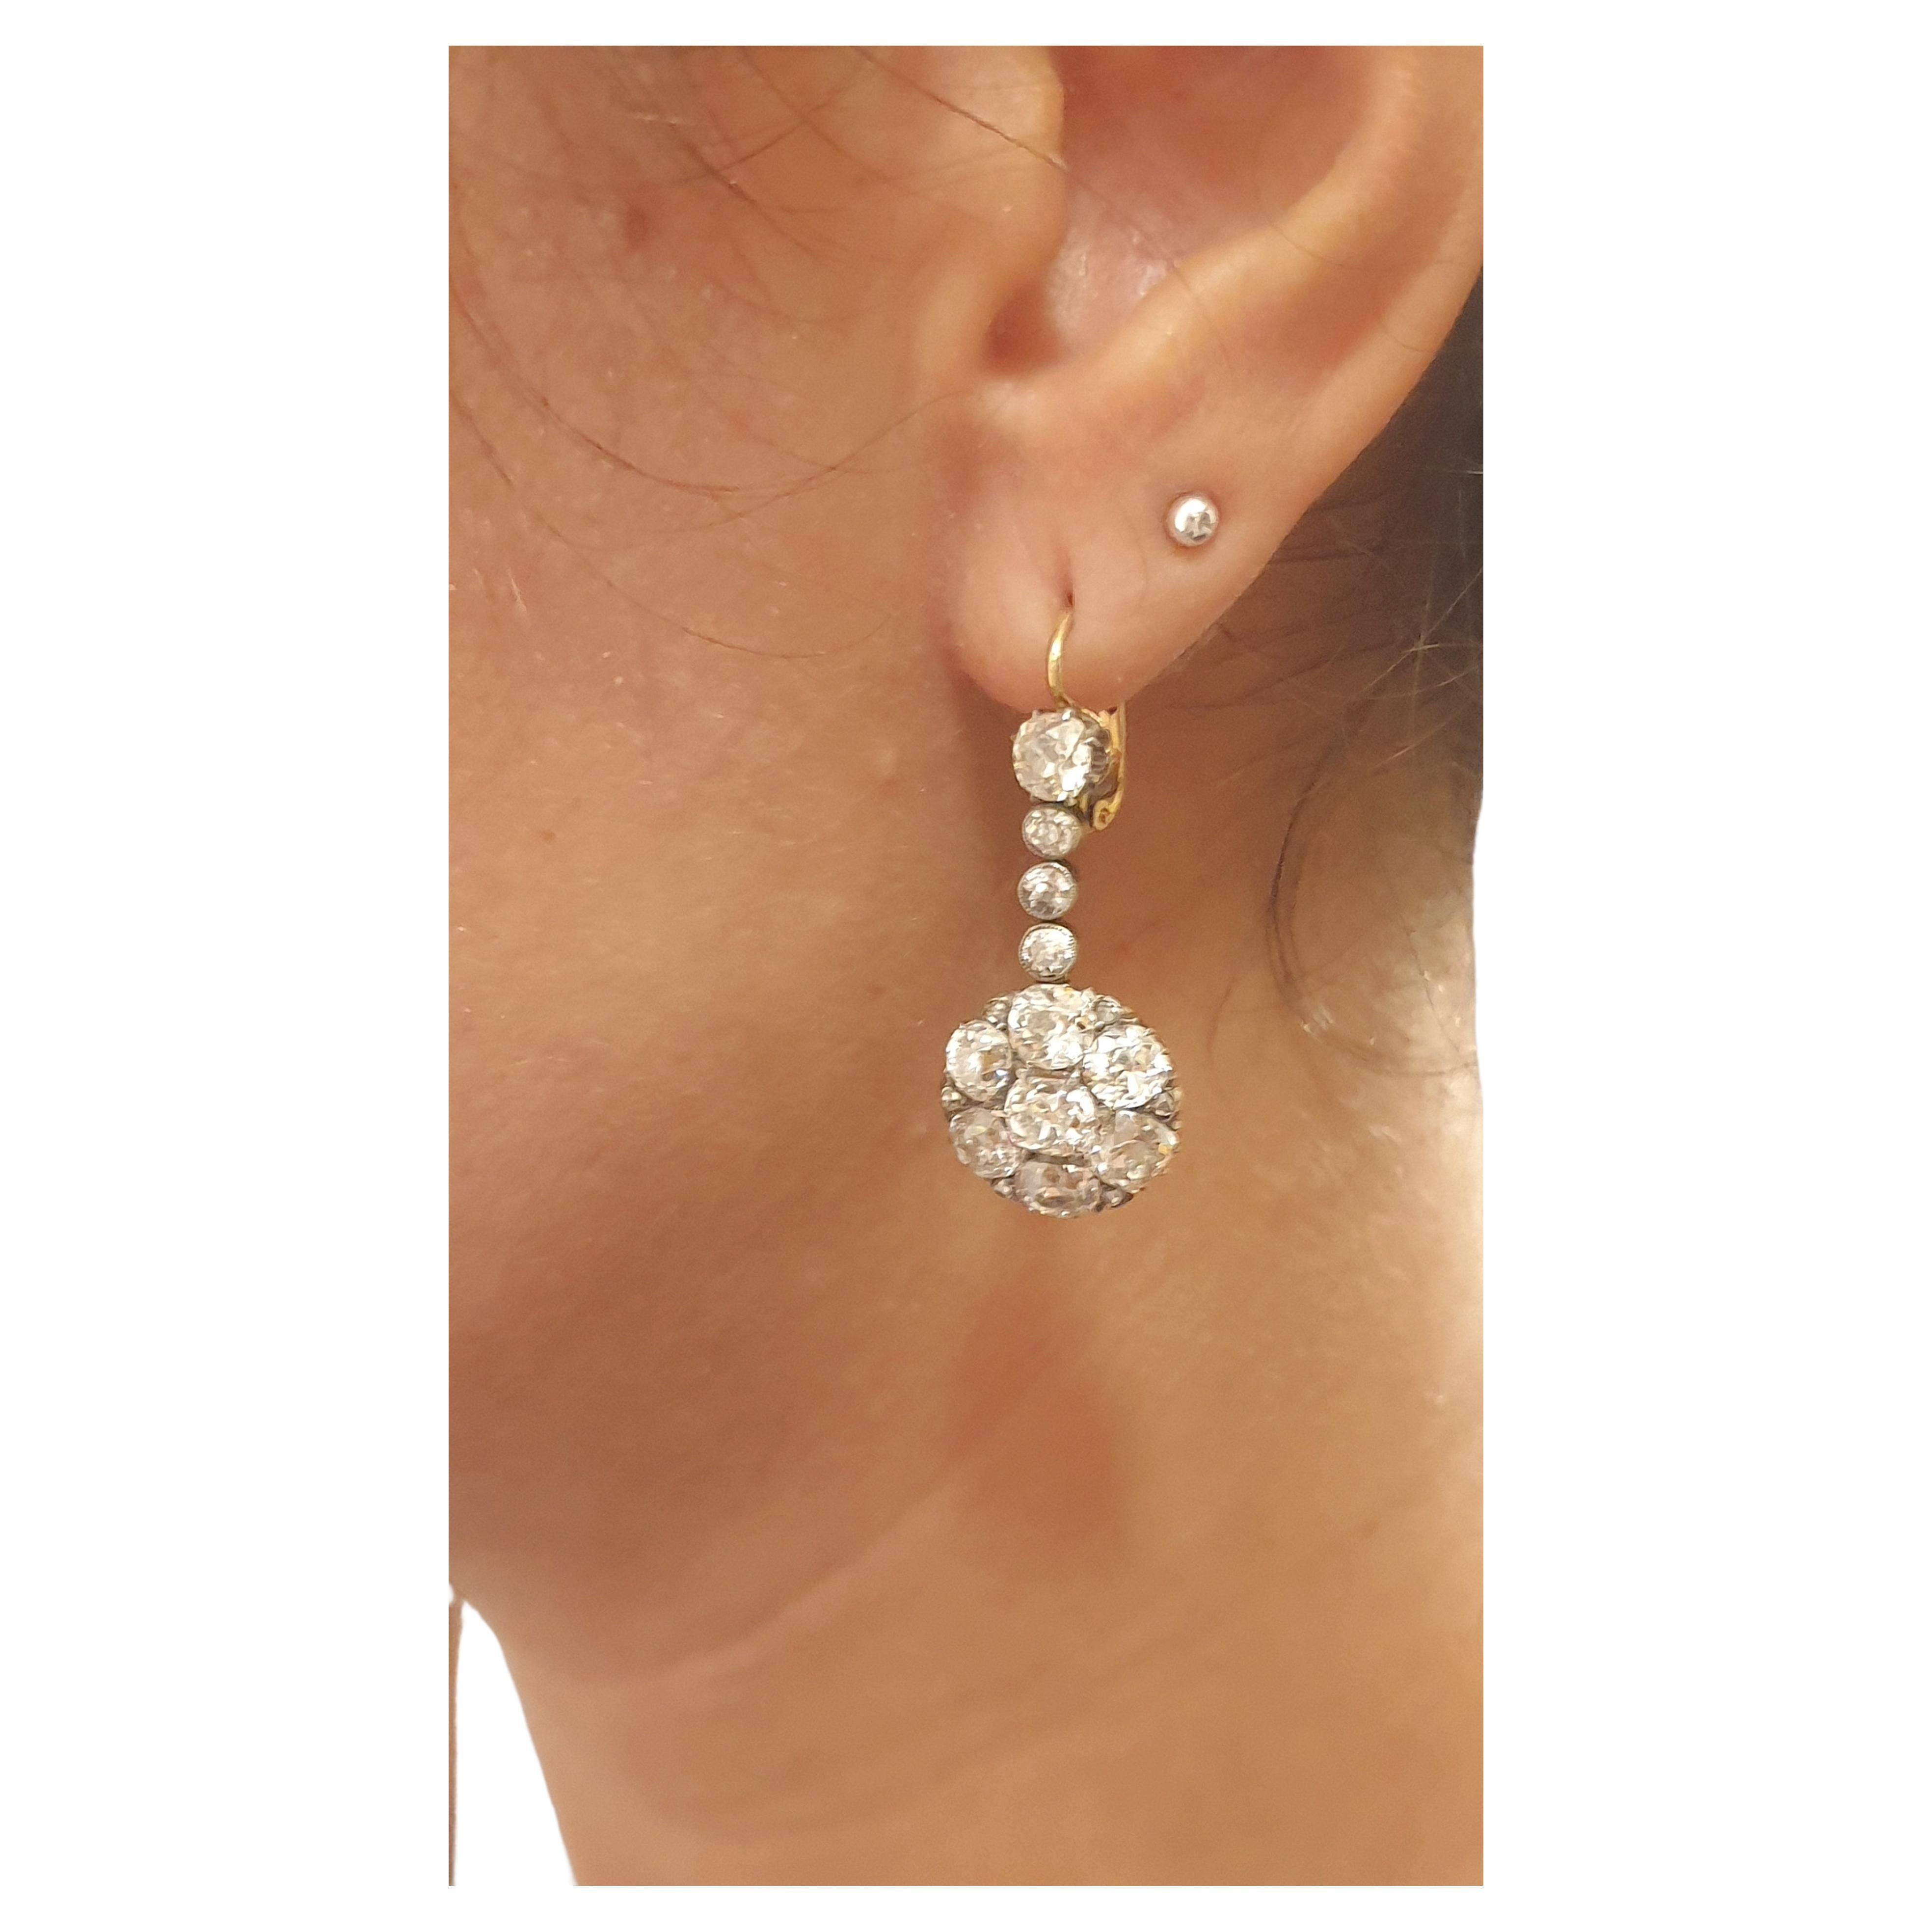 Antique large old mine cut diamond cluster earrings with large diamonds estimate weight of 7 carats H color white excellent spark earrings length 3.5 cm in white and yellow gold setting earrings head diameter 13.80mm and each stone diameter around